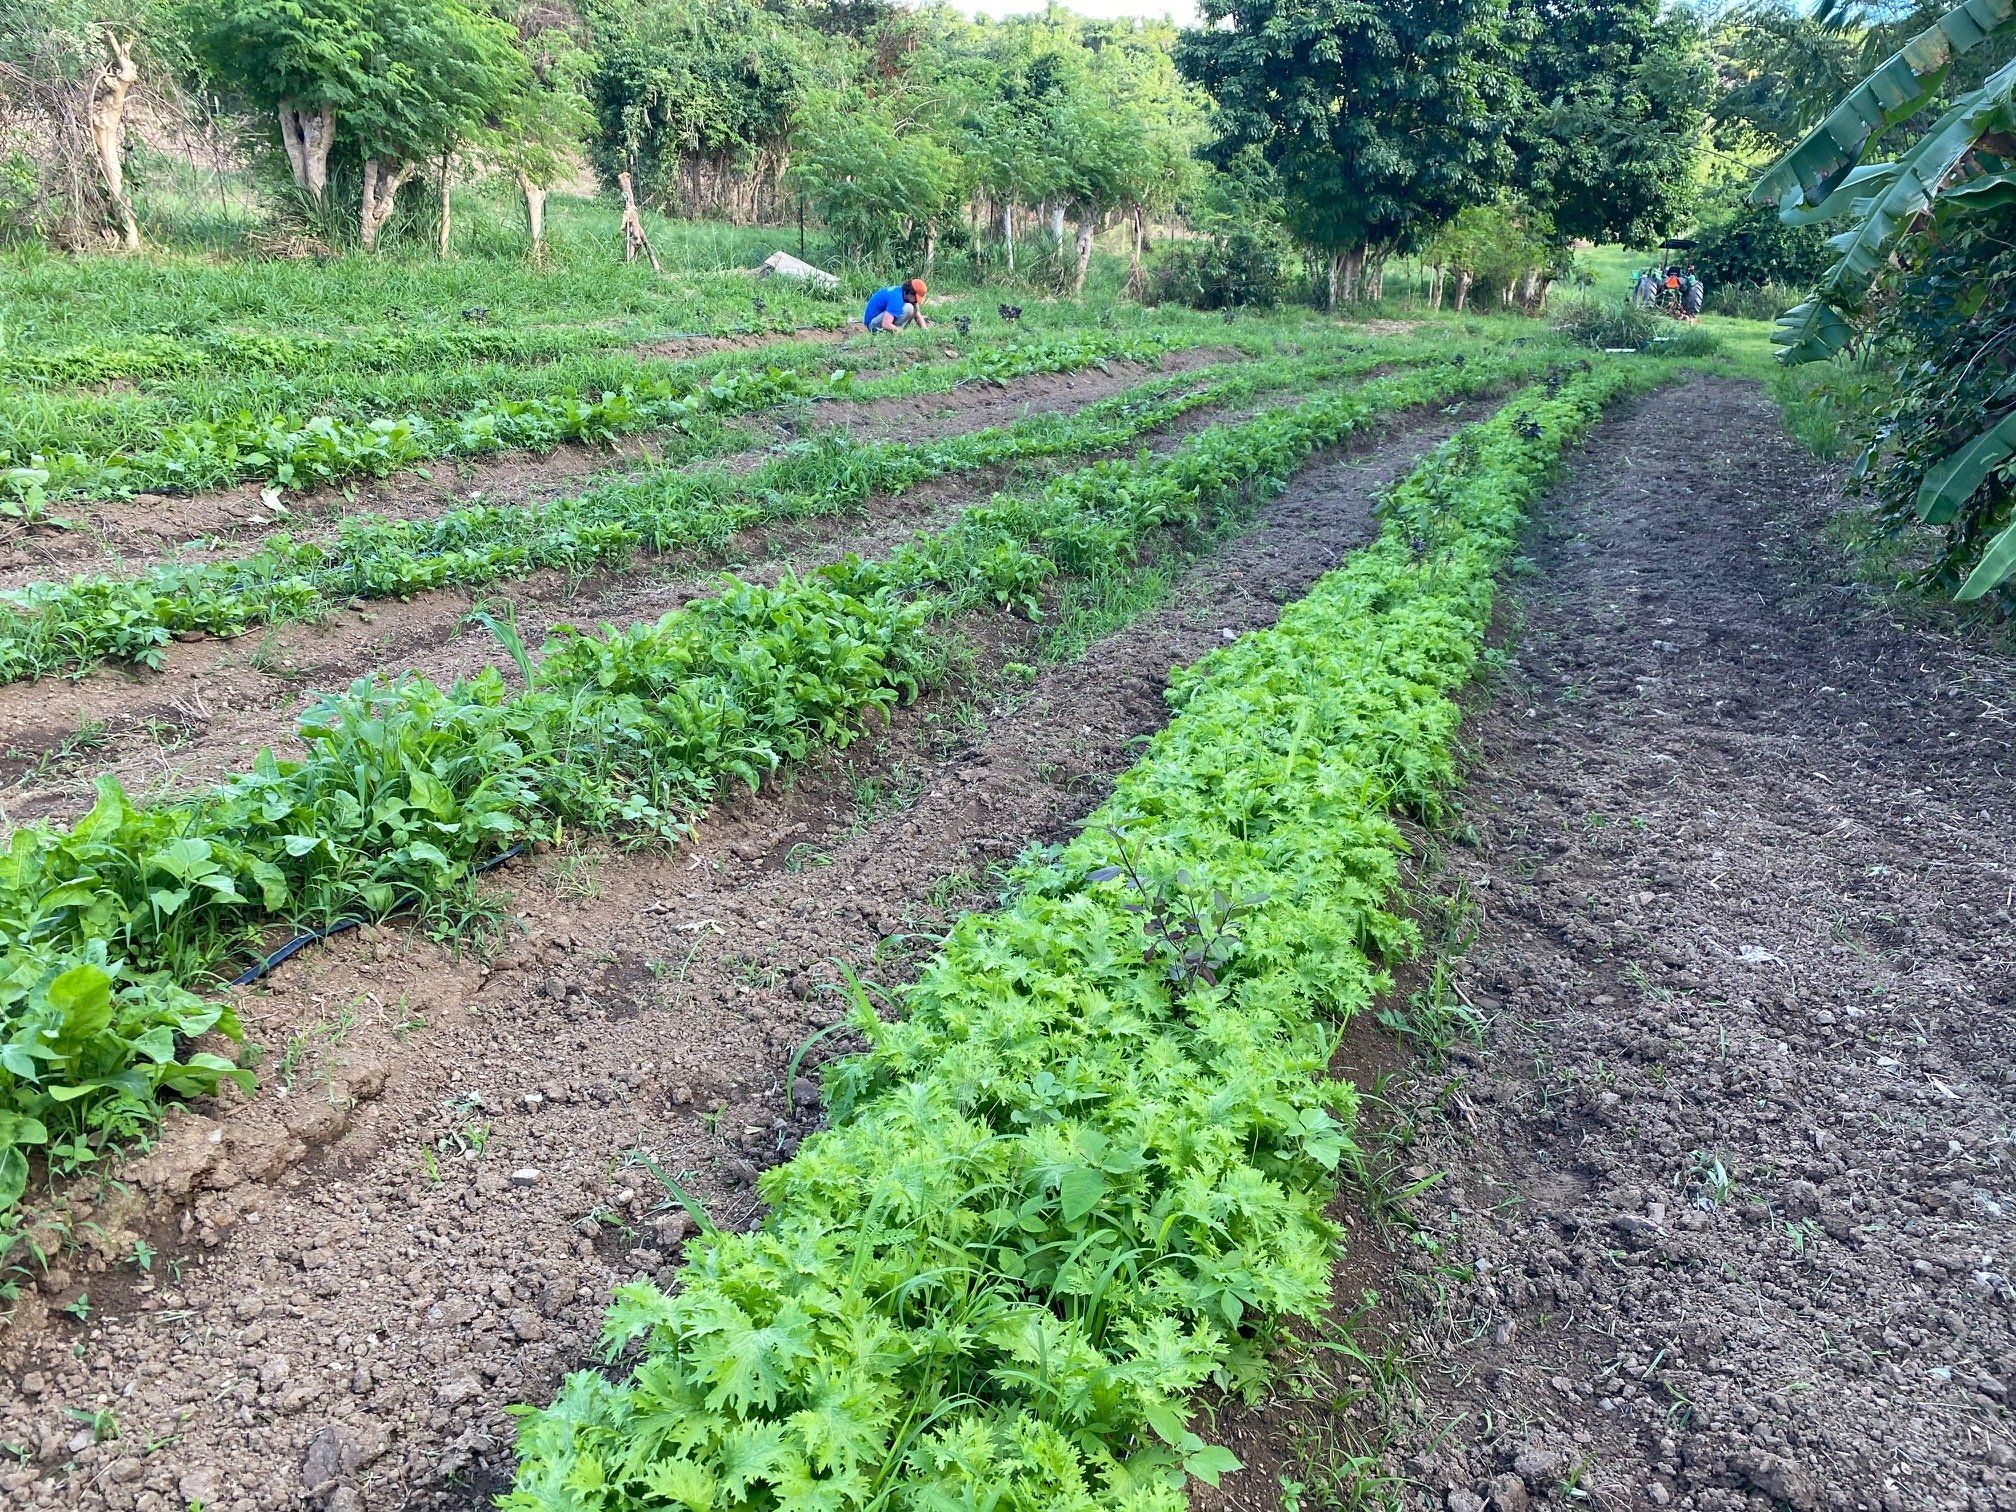 A Green Start to the New Year! Welcome to the 2021 Farm Share Winter Season~